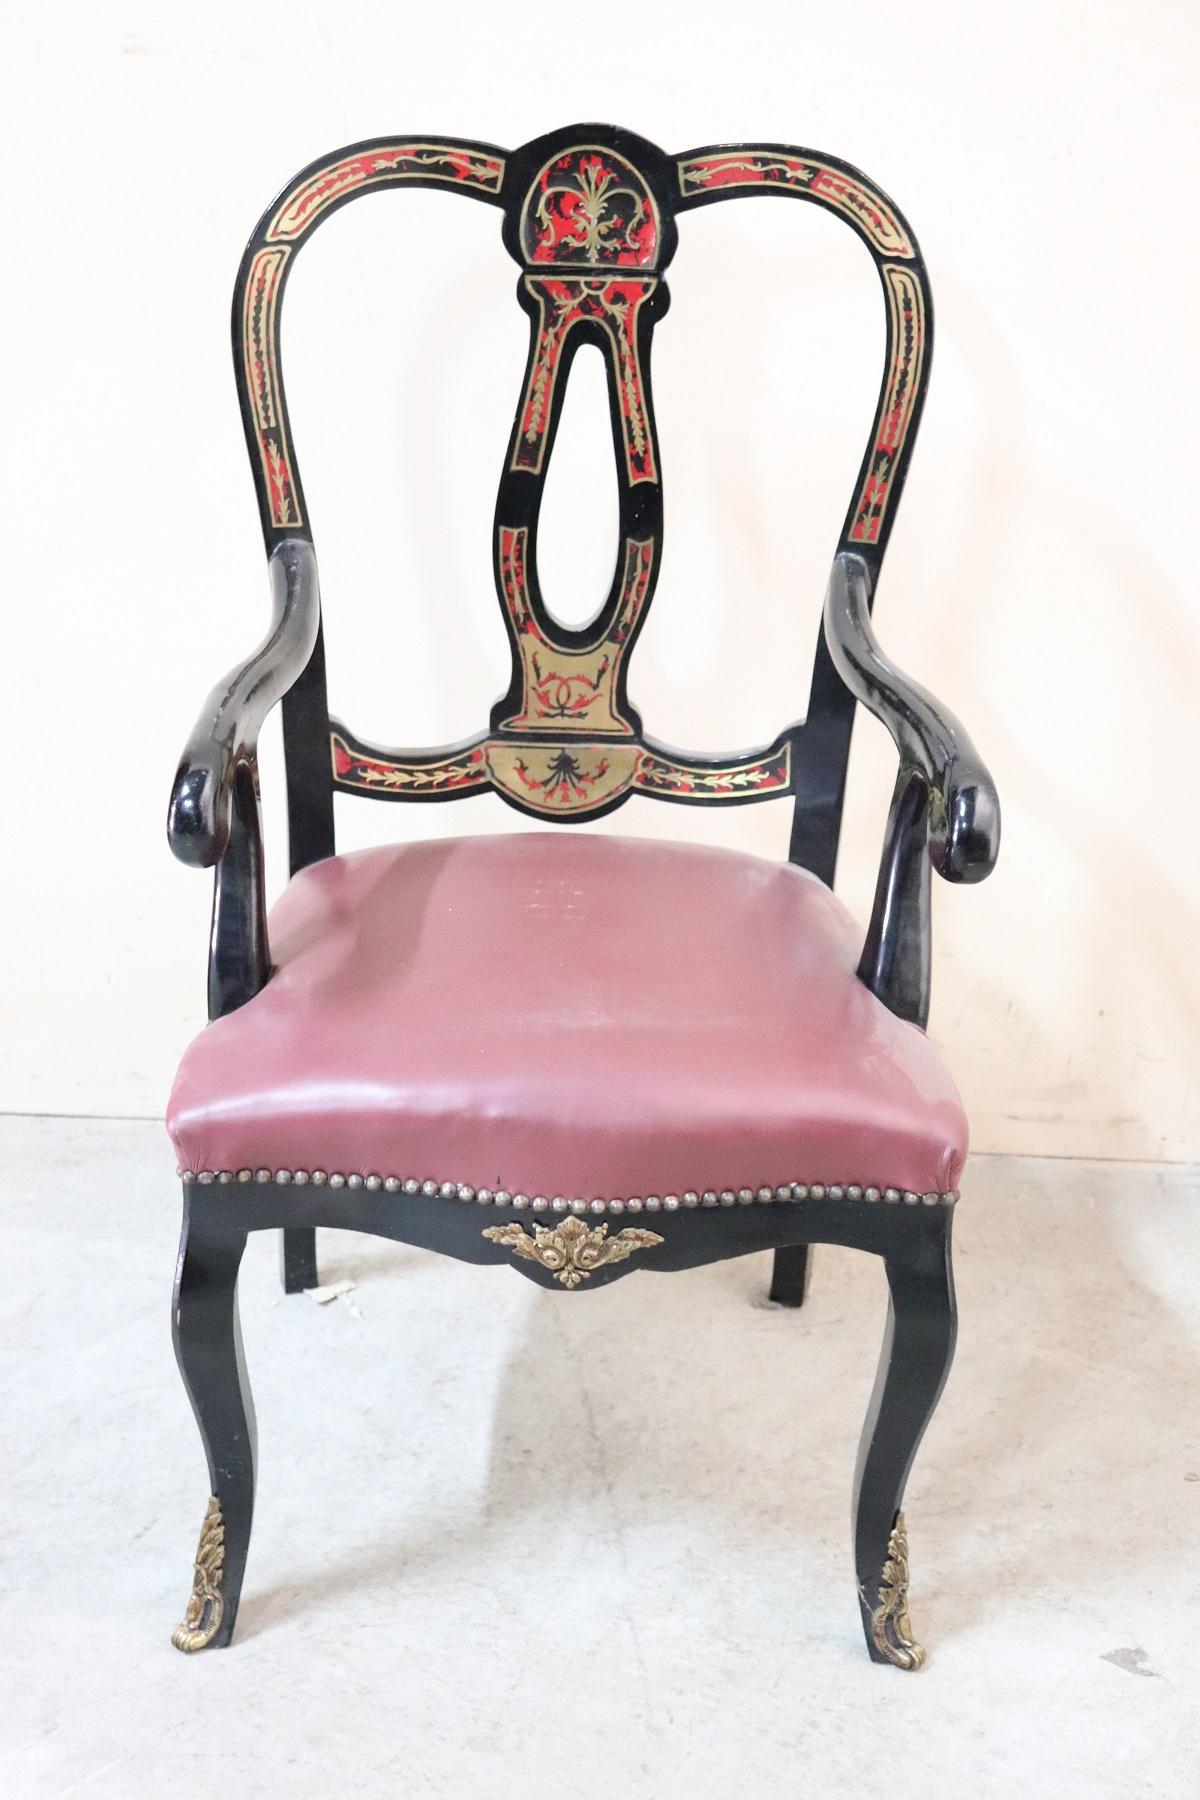 Rare and fine quality antique French Louis XV style boulle, 1880s red tortoiseshell and brass inlaid pair of armchairs. The two armchairs have different decorations probably because one intended for women and the other for men. Used conditions.